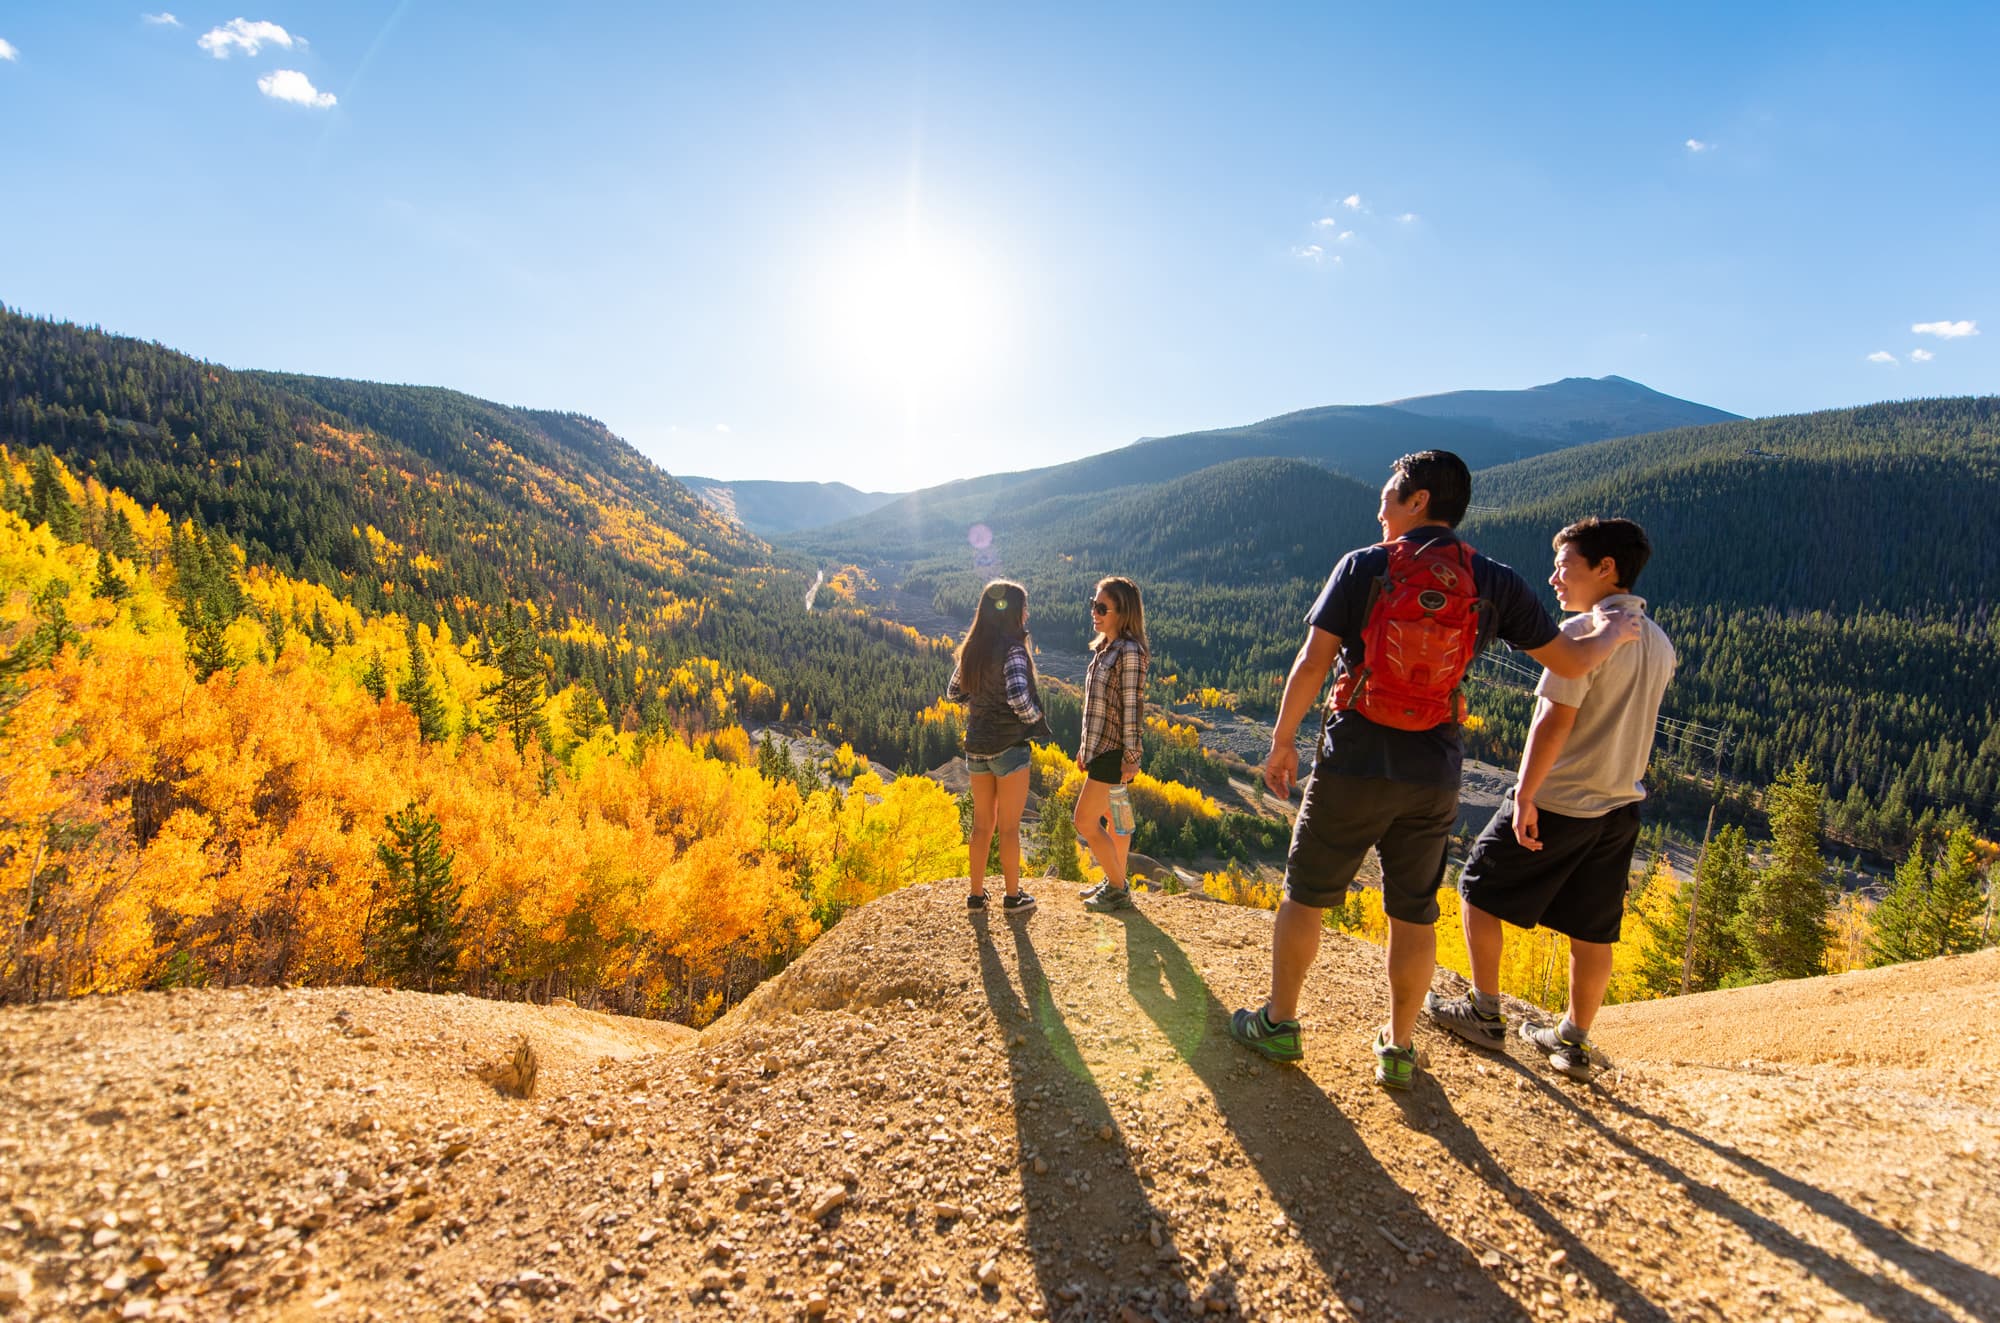 Family looking out over a valley on a sunny day. Yellow trees are seen throughout the mountains.